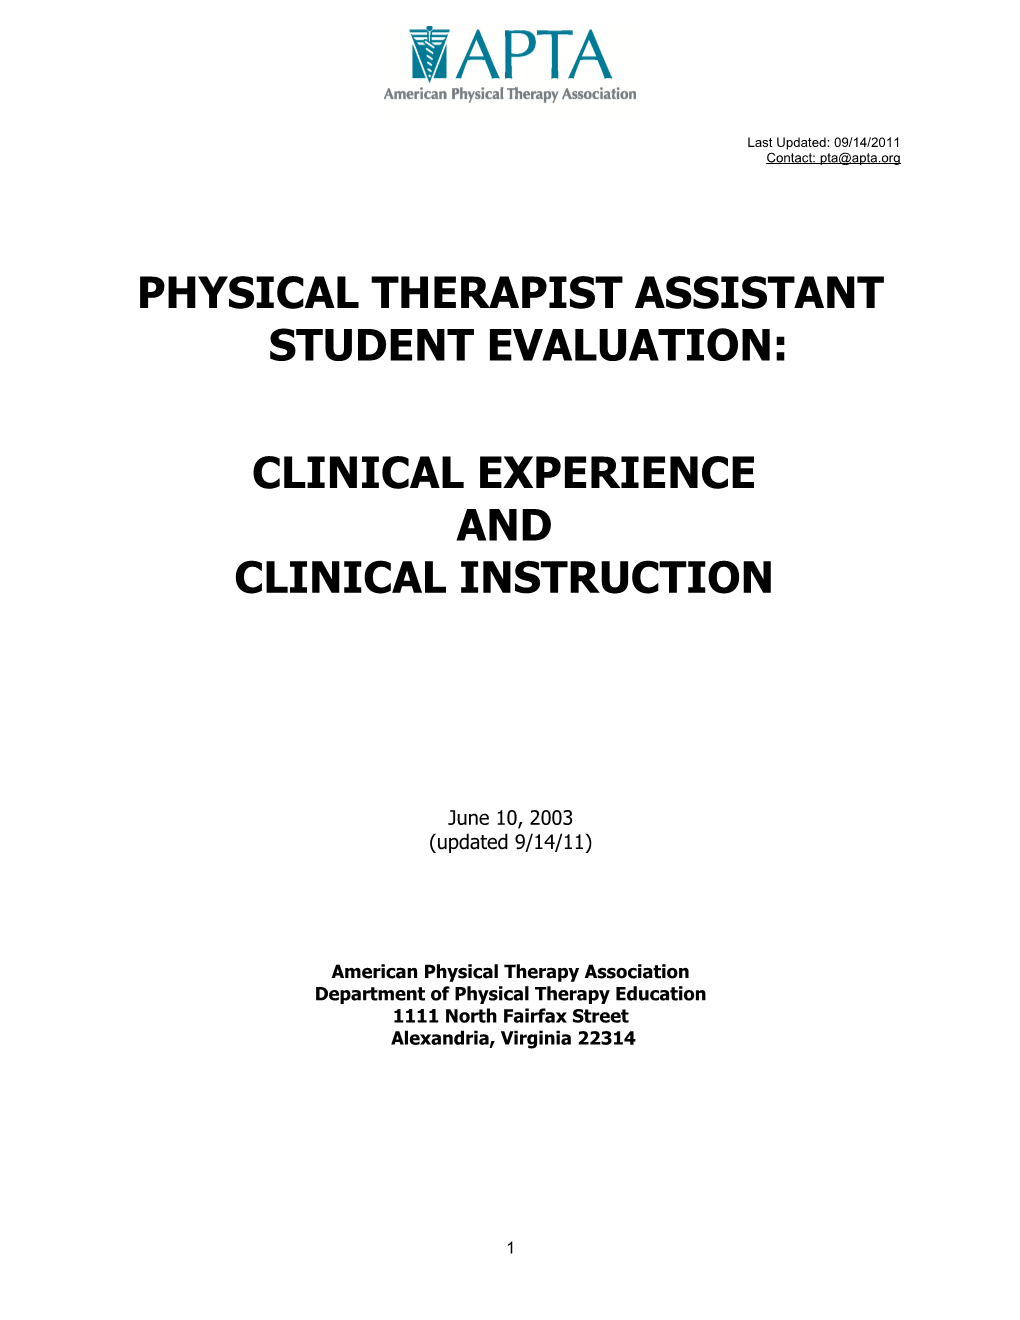 Physical Therapist Assistant Student Evaluation